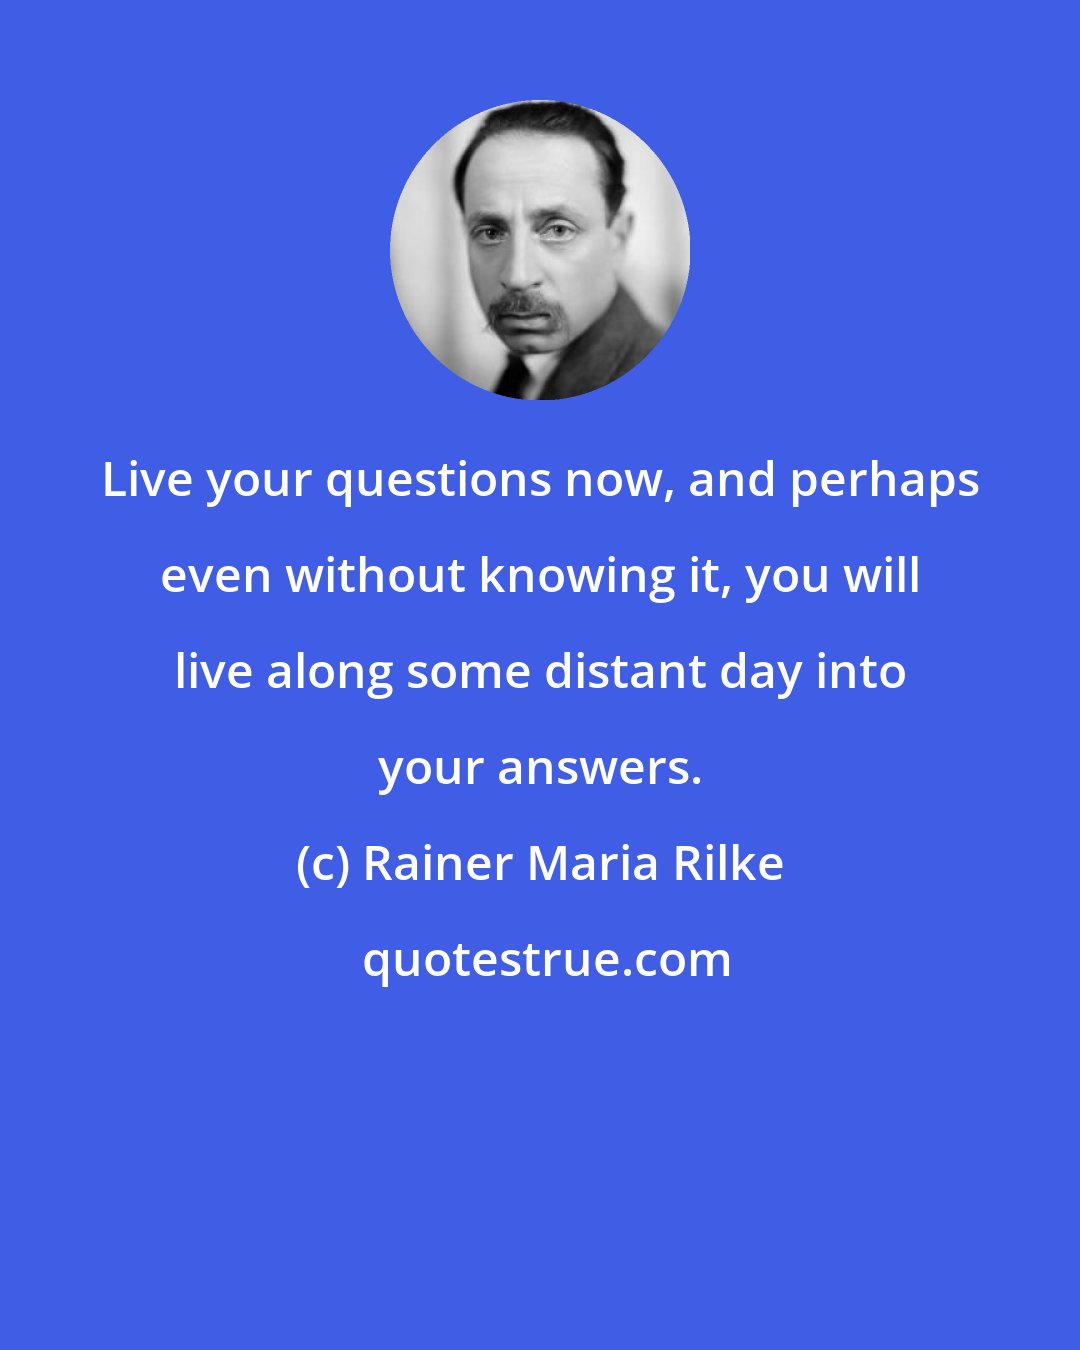 Rainer Maria Rilke: Live your questions now, and perhaps even without knowing it, you will live along some distant day into your answers.